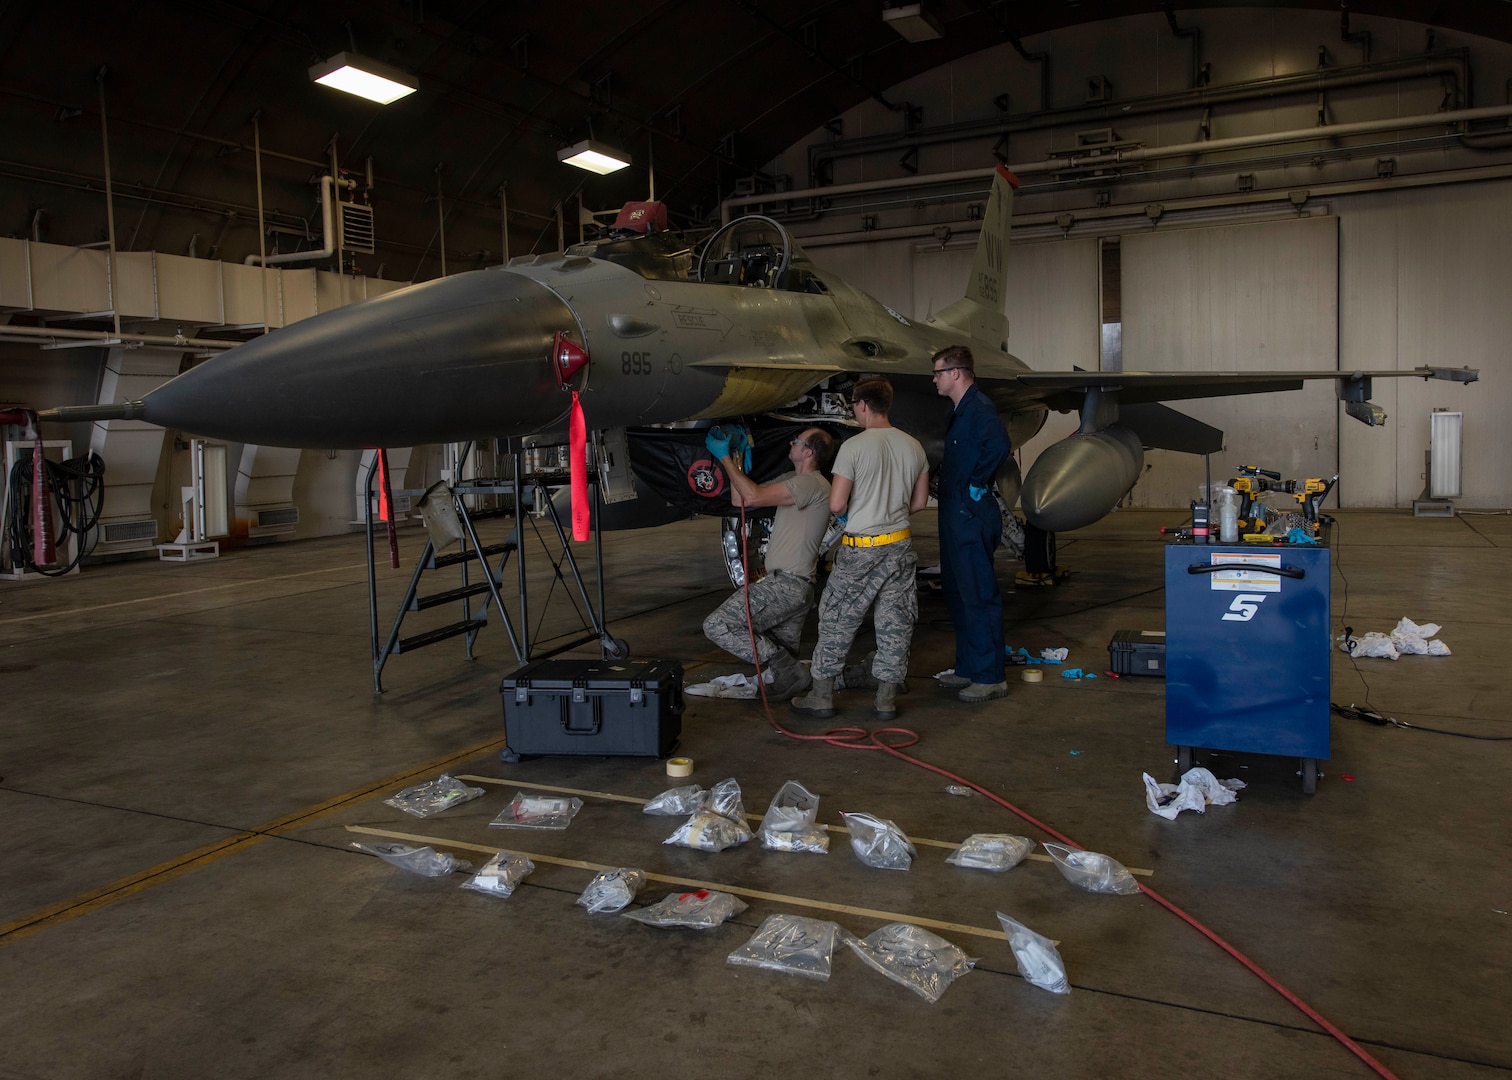 U.S. Air Force Tech. Sgt. Jordon Jones, left, Staff Sgt. Charles White, center, both aircraft structural maintenance craftsman, and Senior Airman Jaceb Brammer, right, an aircraft structural maintenance journeyman, all with the 35th Maintenance Squadron, inspect an F-16 Fighting Falcon at Misawa Air Base, Japan, Aug. 24, 2018. The team discovered corrosion on the lower skin of the aircraft, making it inoperable until repair. Typically the repair would be performed by either depot-level maintainers or contractors, however, the F-16 System Program Office at Hill Air Force Base approved Misawa Airmen to rectify the issue. (U.S. Air Force photo by Airman 1st Class Collette Brooks)